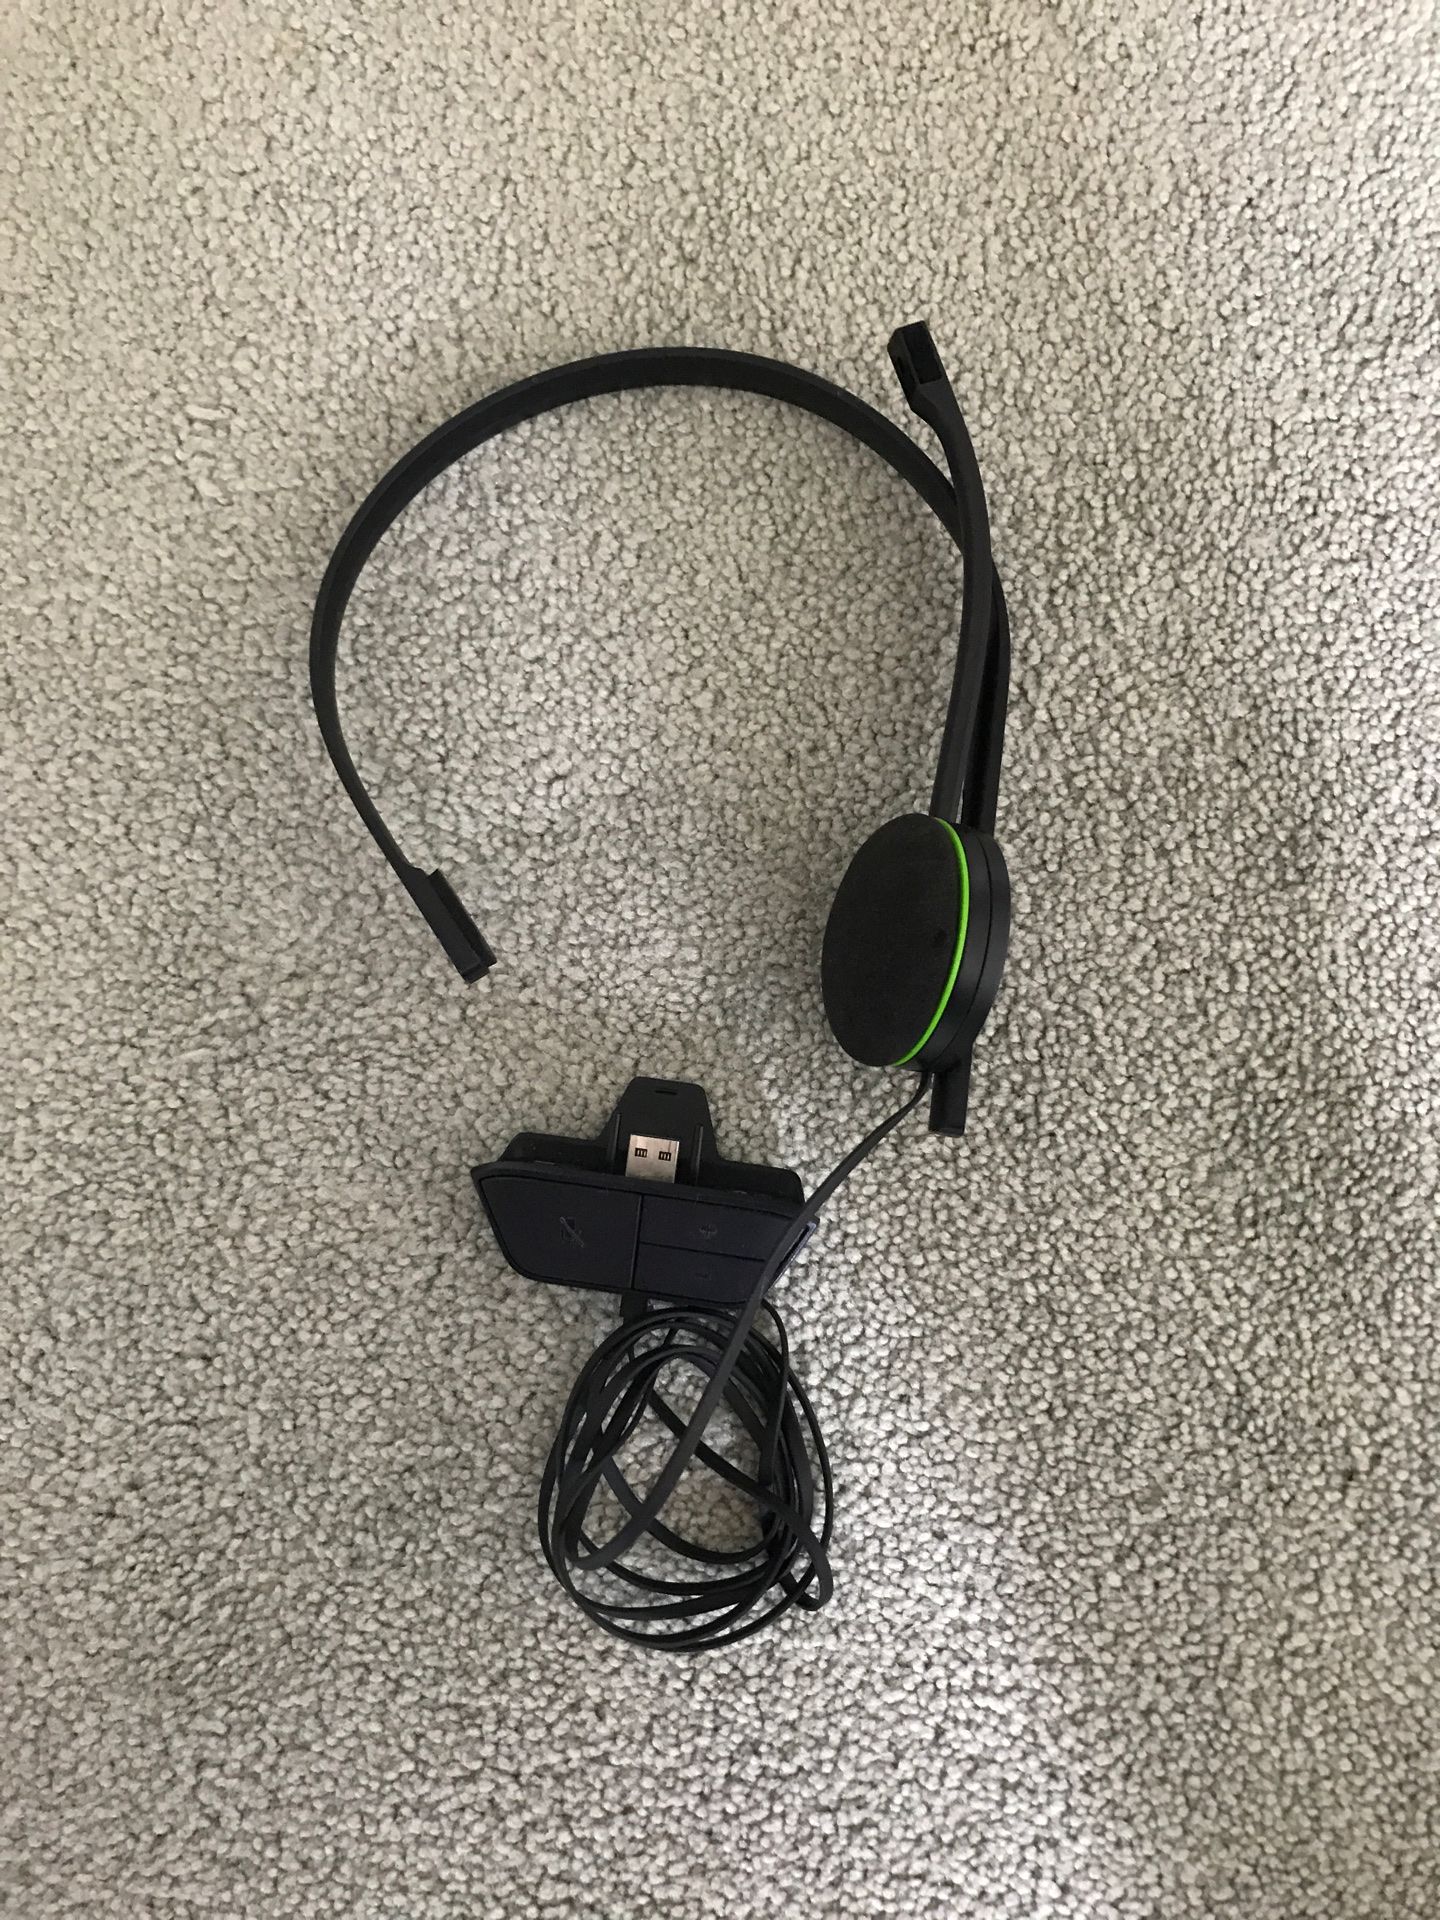 Headset (XBOX ONE) PERFECT CONDITION